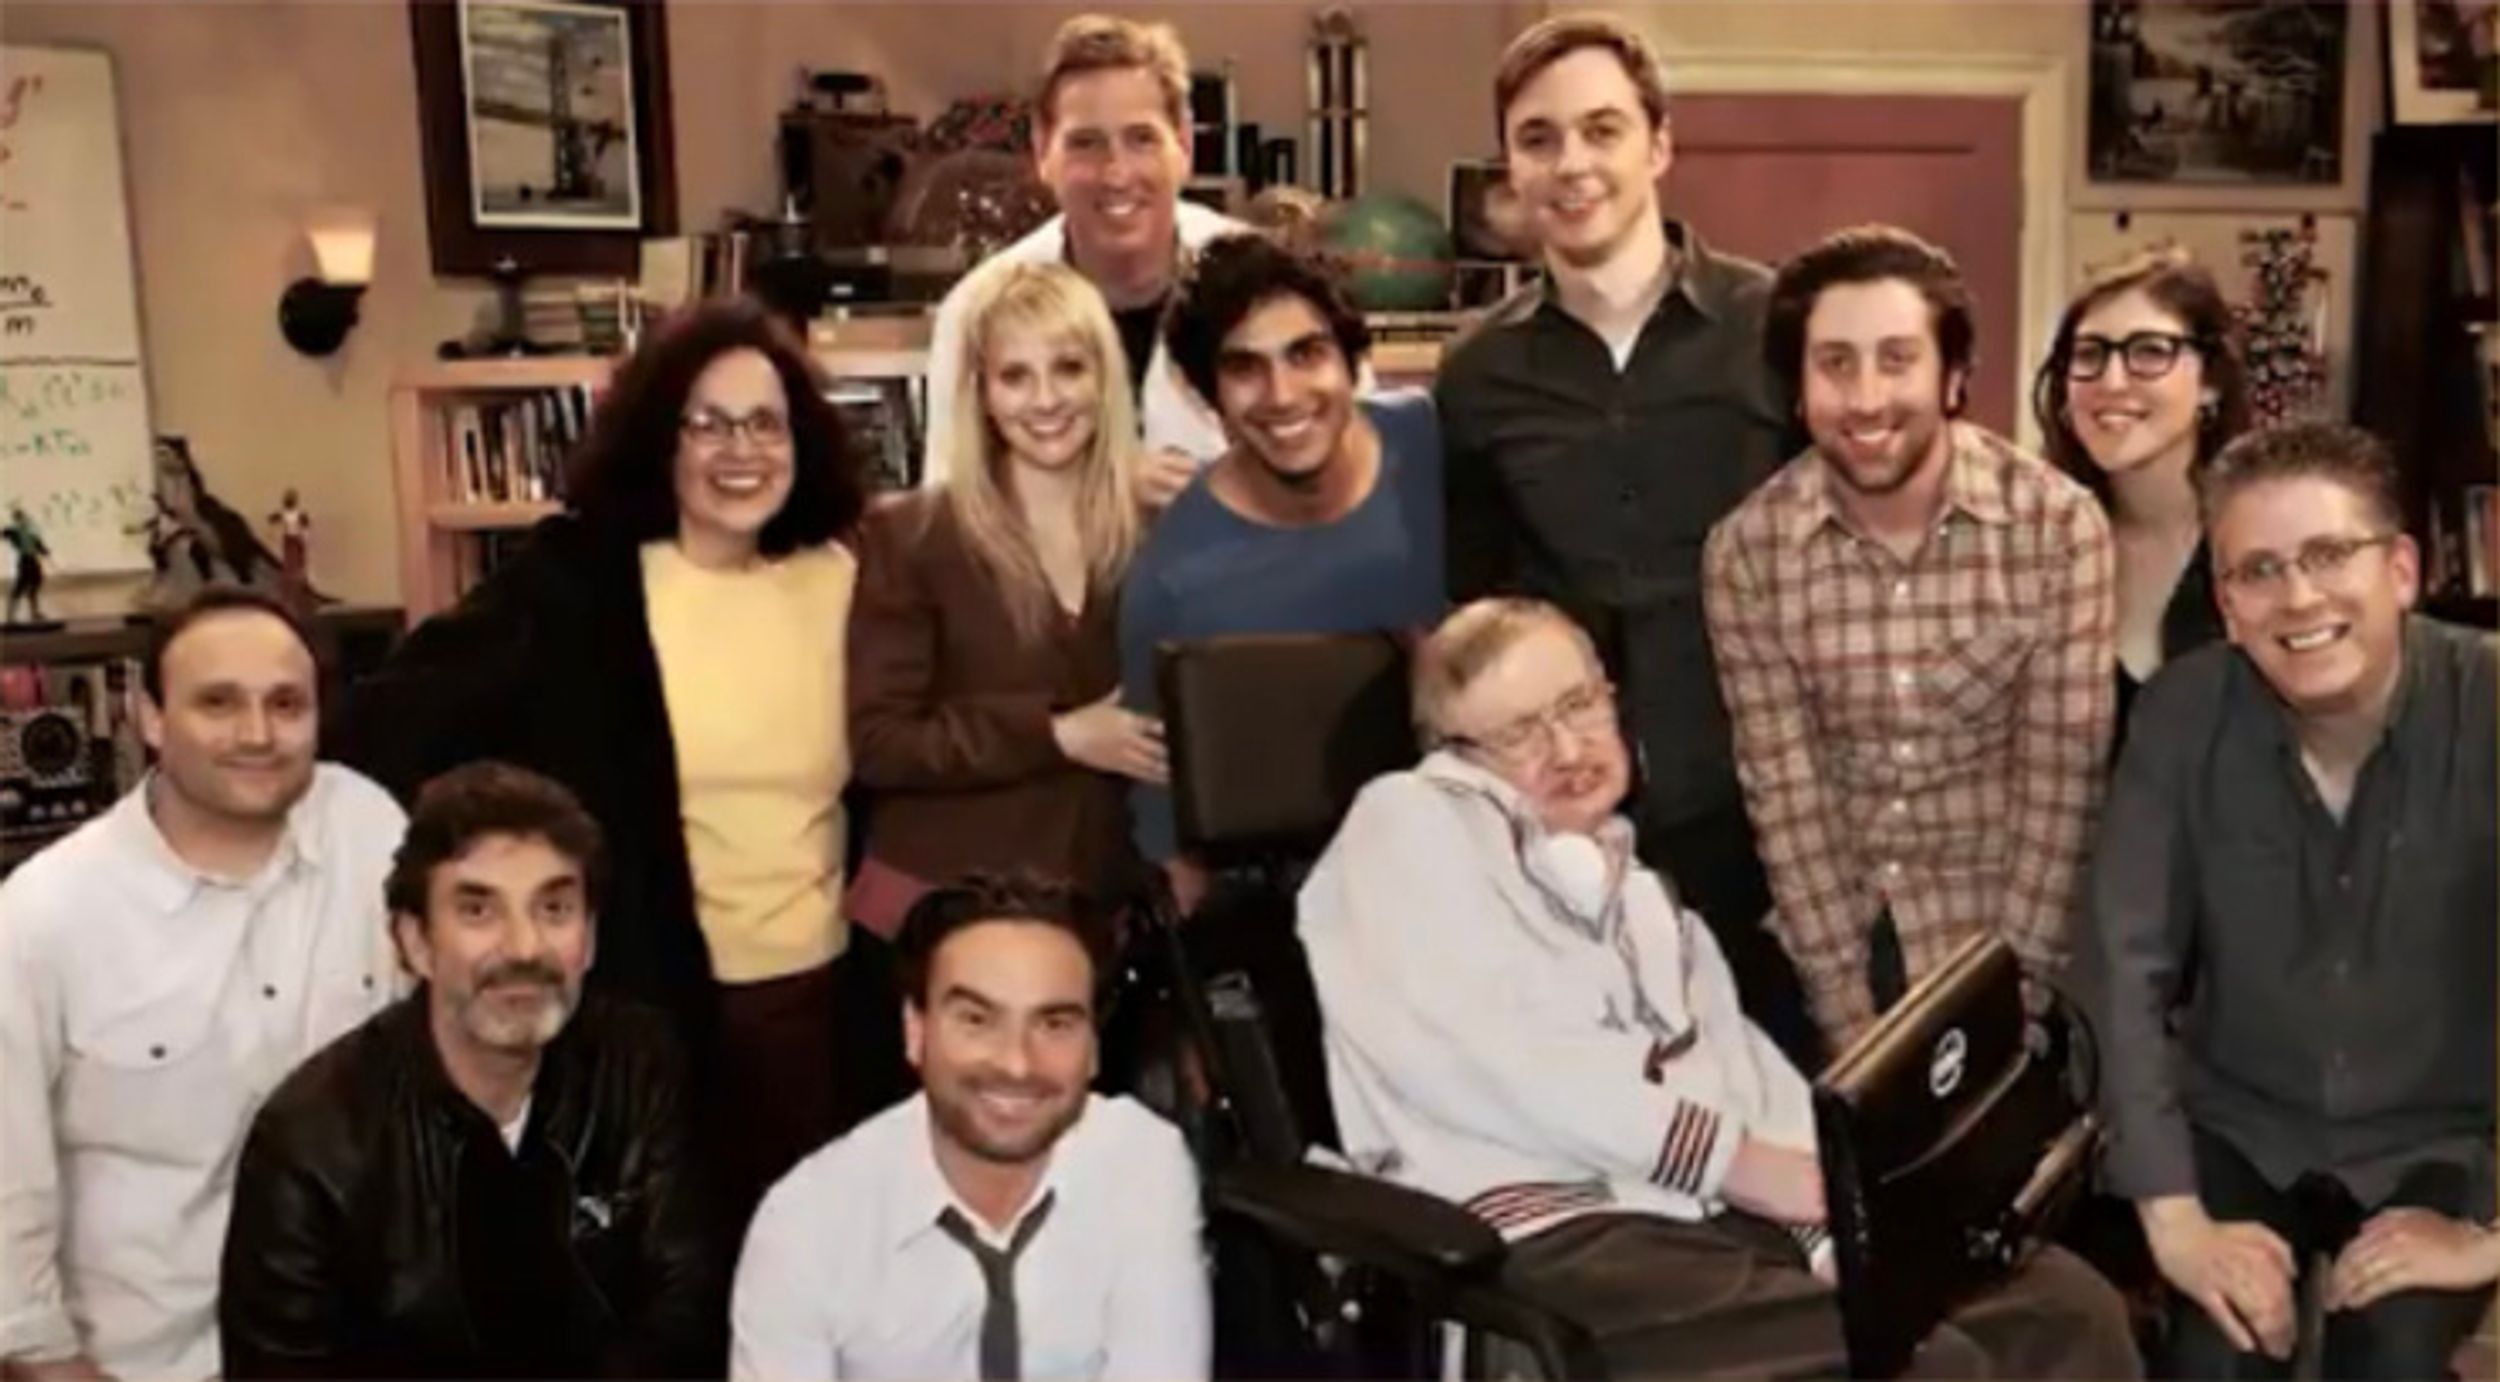 'The Big Bang Theory' Pays Emotional Tribute To Stephen Hawking In This Deleted Scene